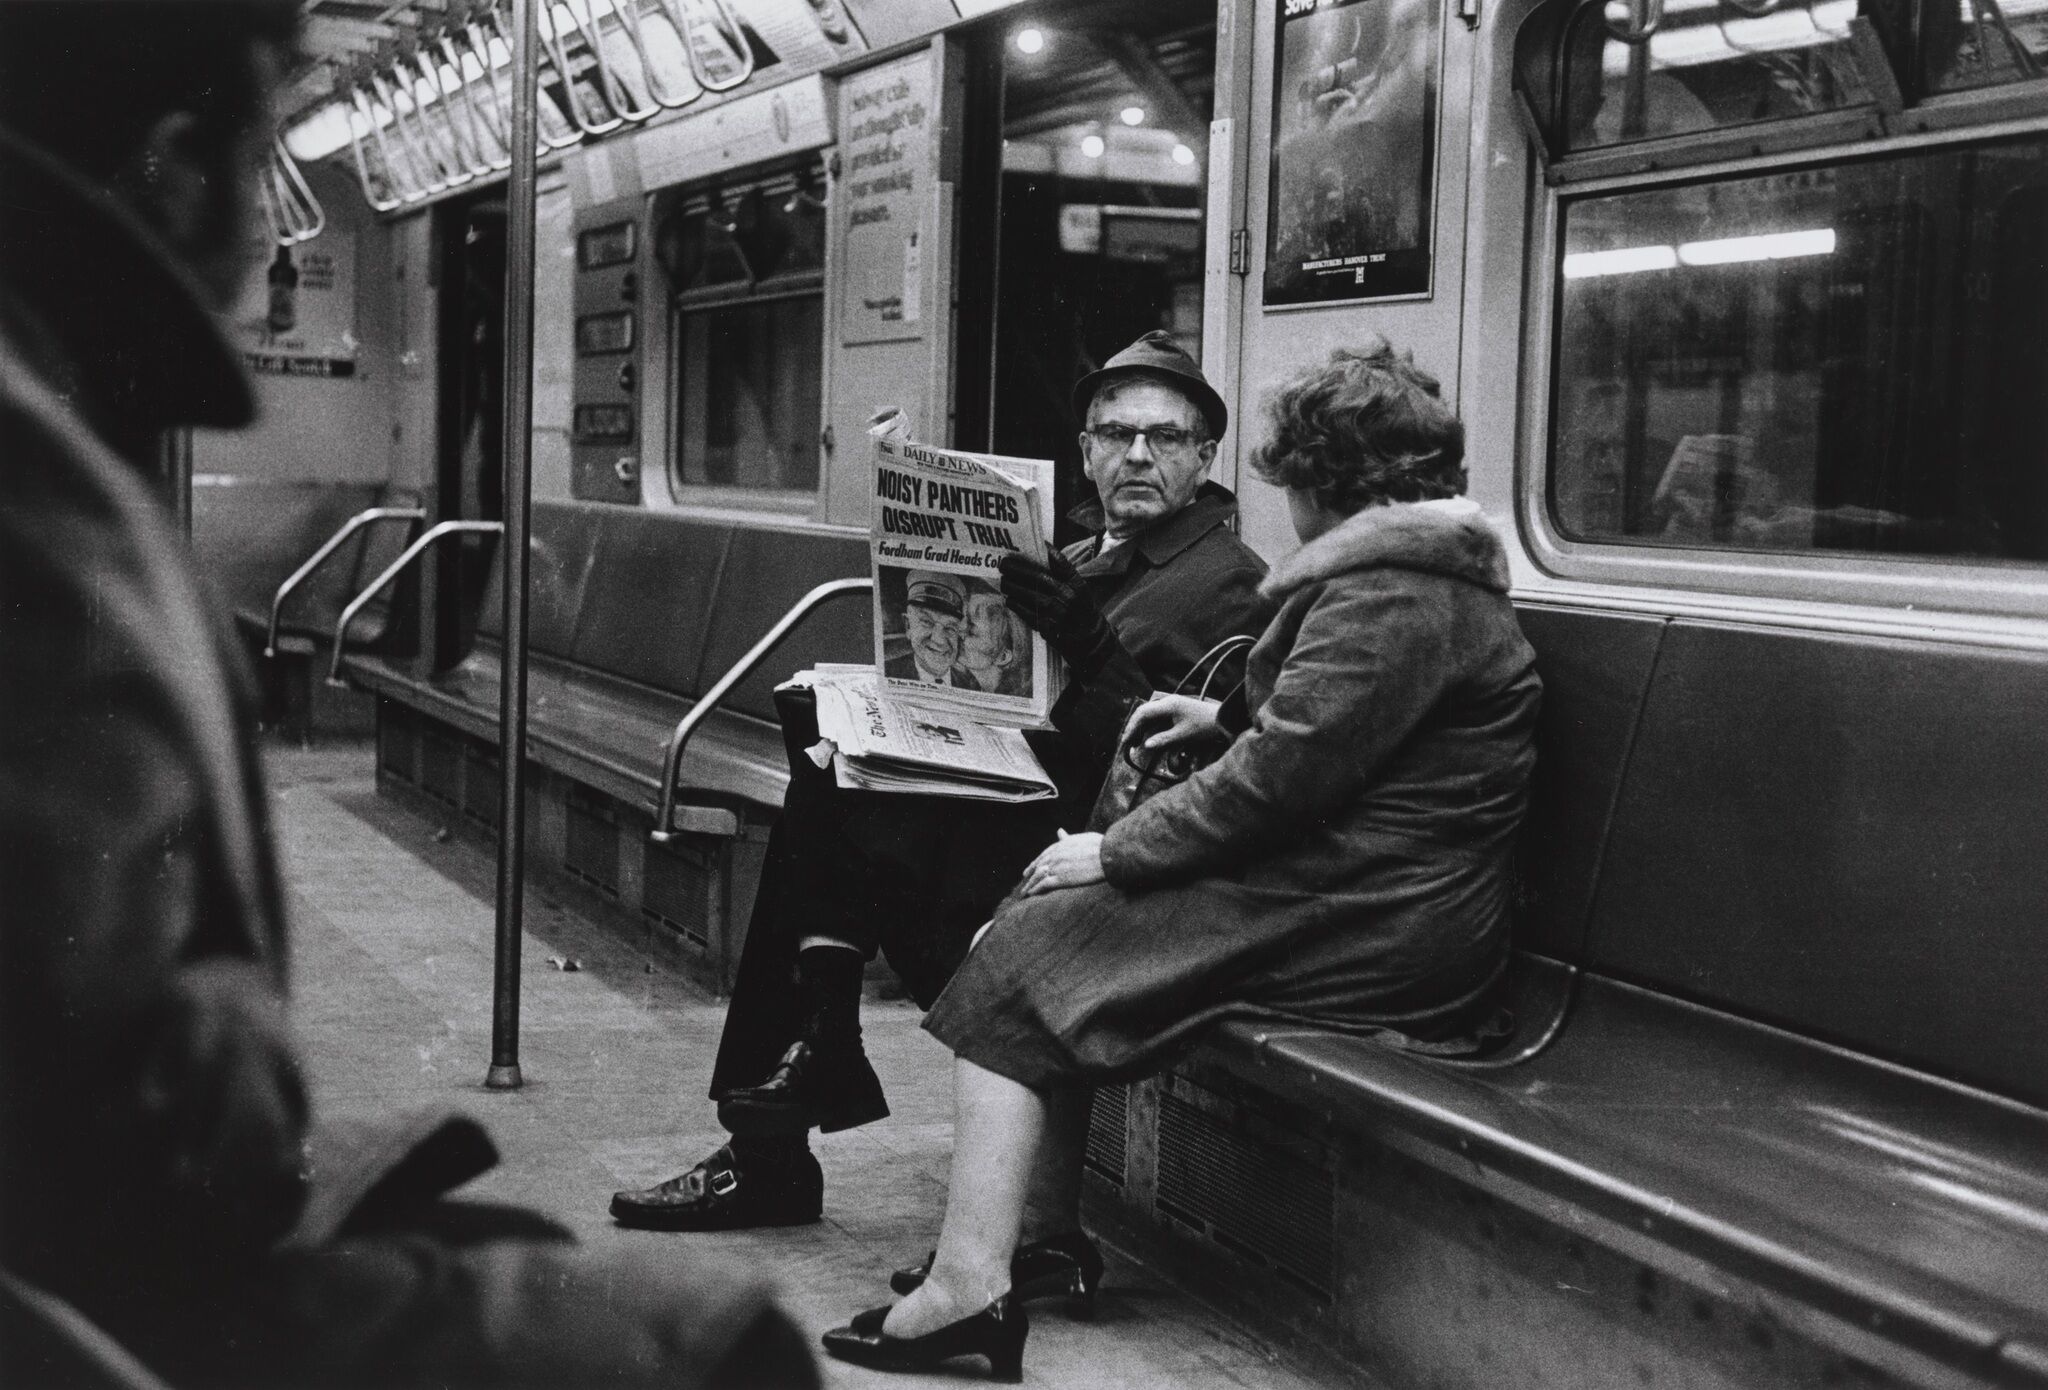 Two people sitting inside a subway talking to one another.